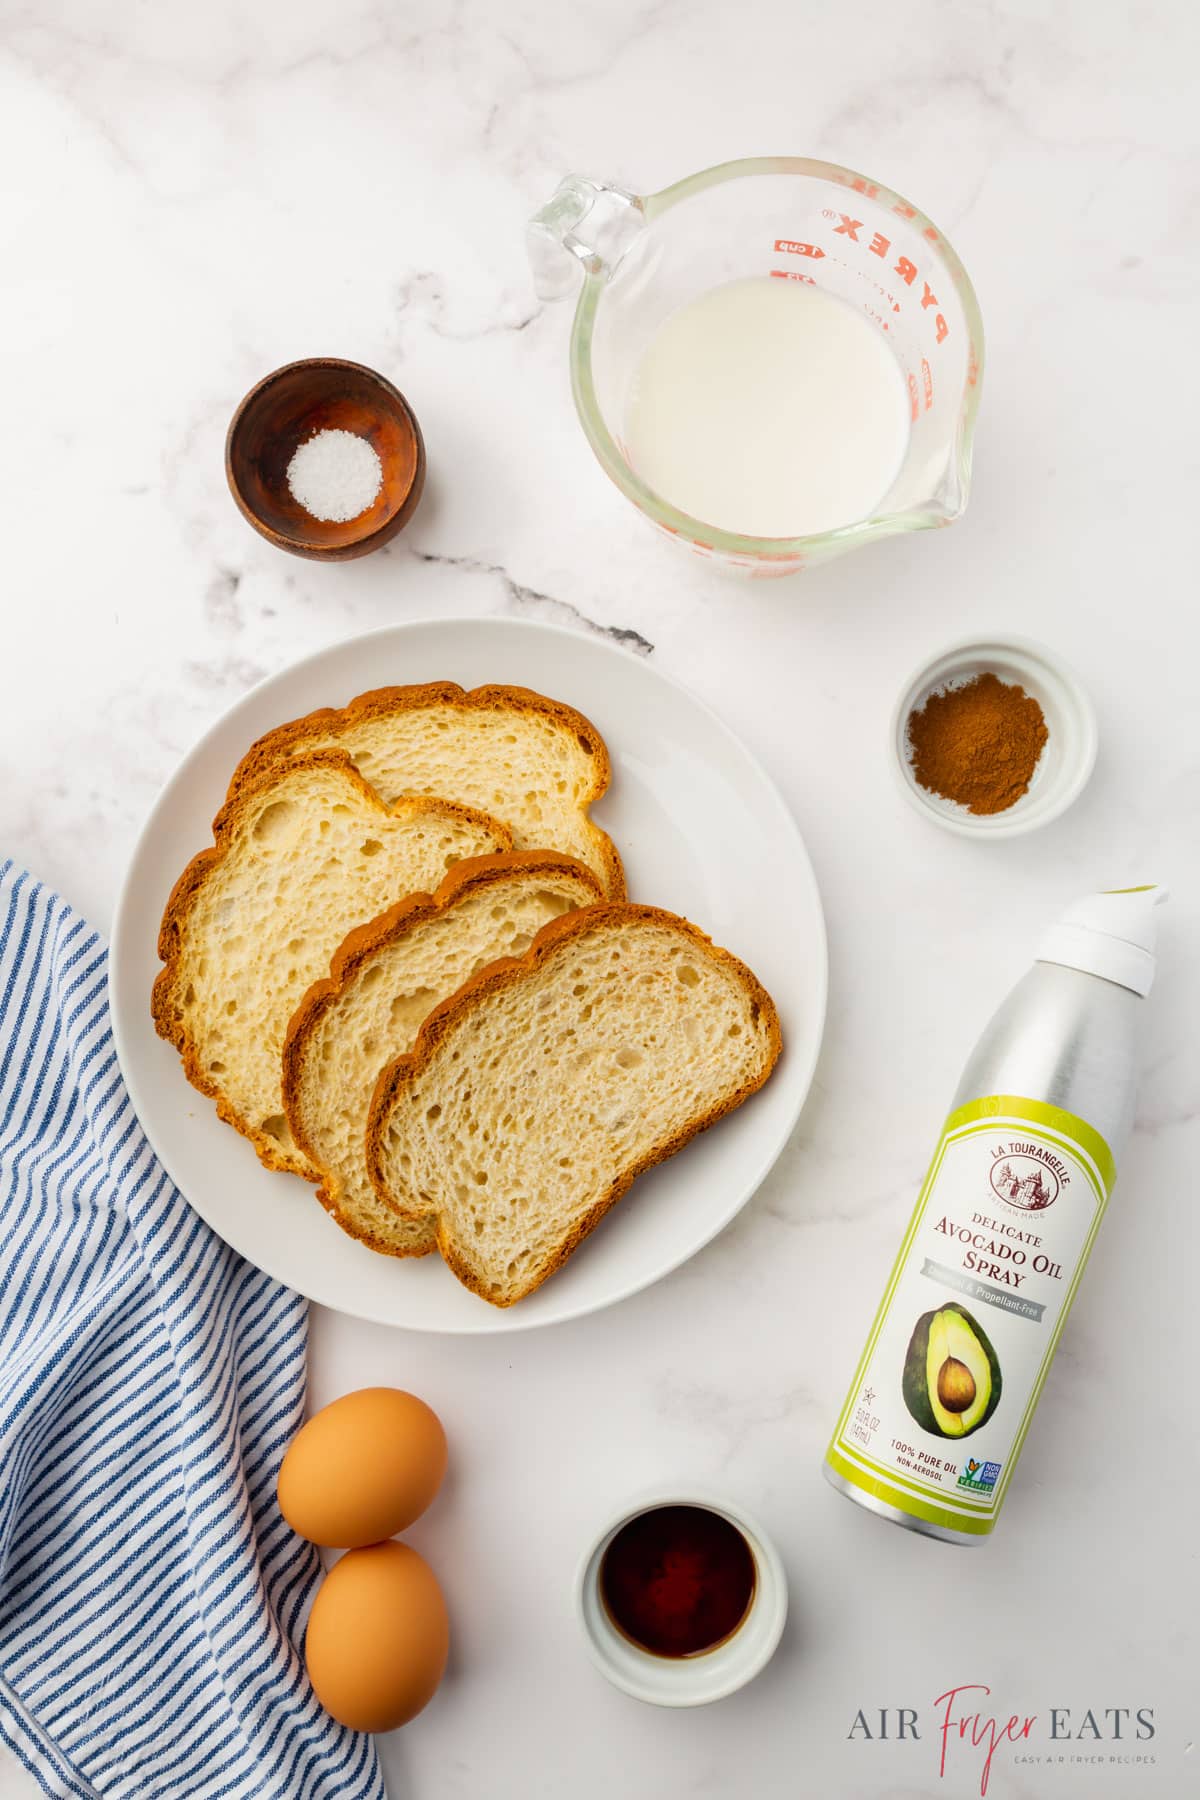 The ingredients needed to make air fryer french toast,